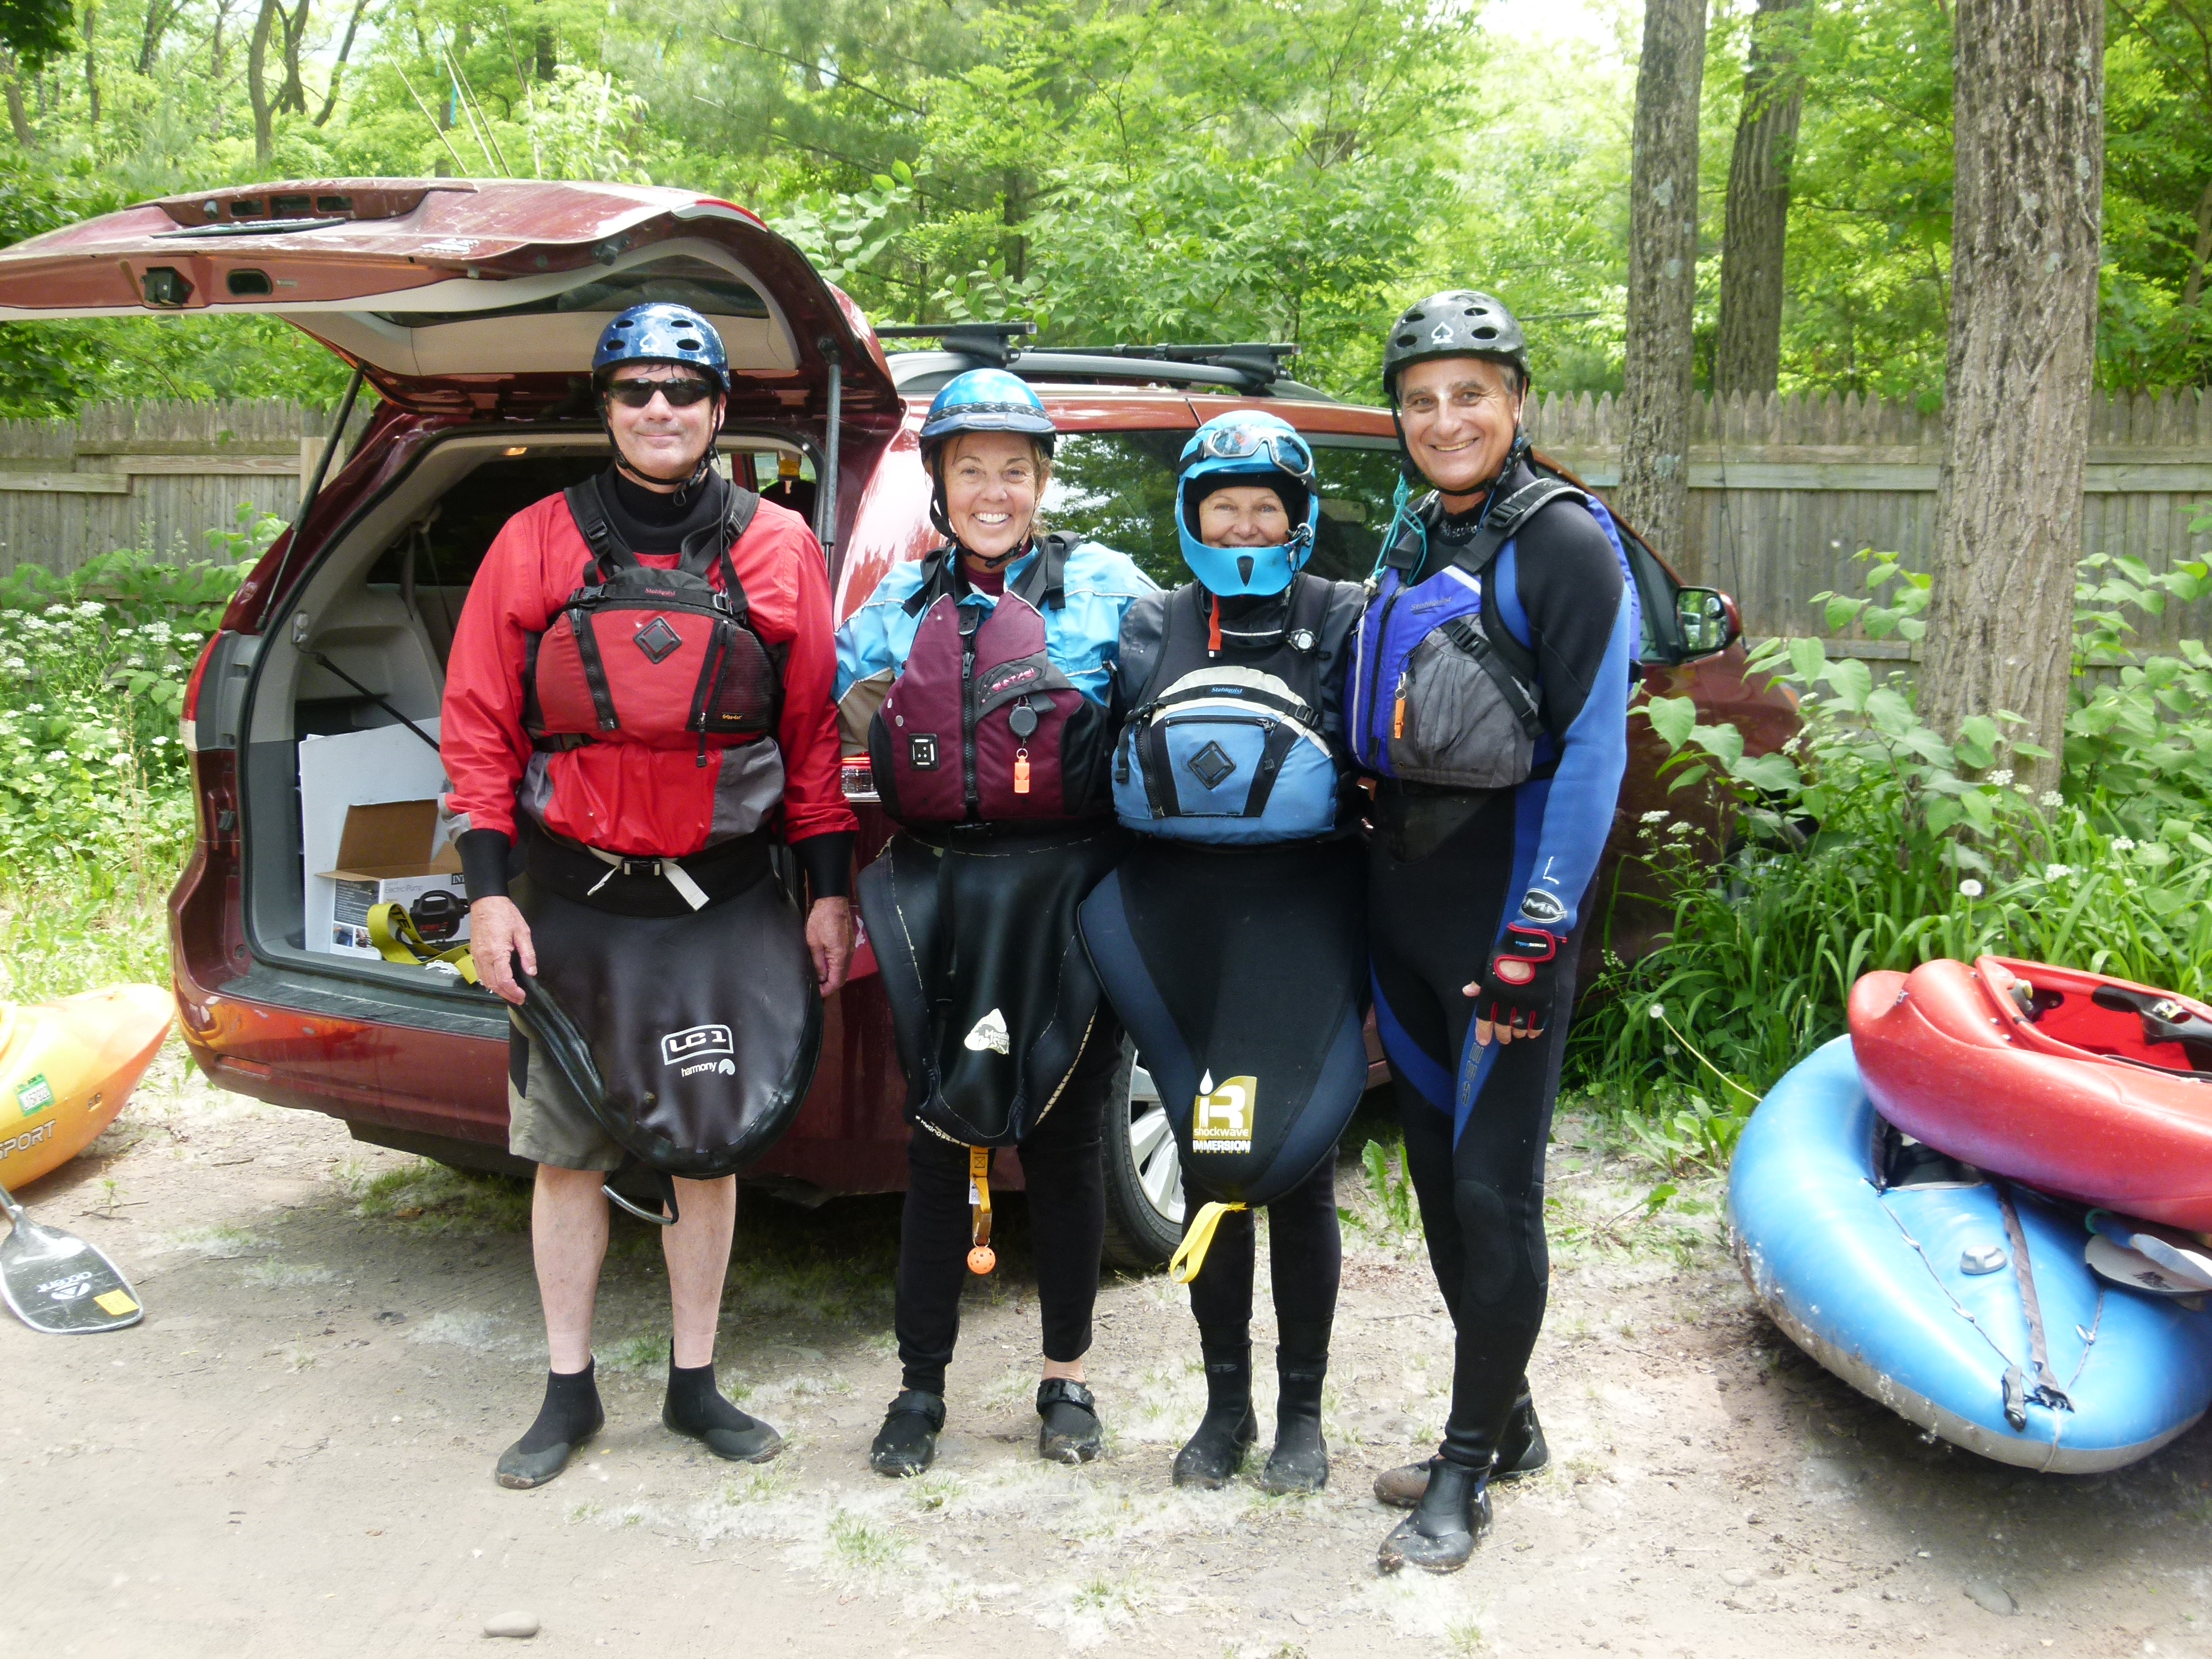 Kayakers Welcome - We'll Portage You & Your gear!